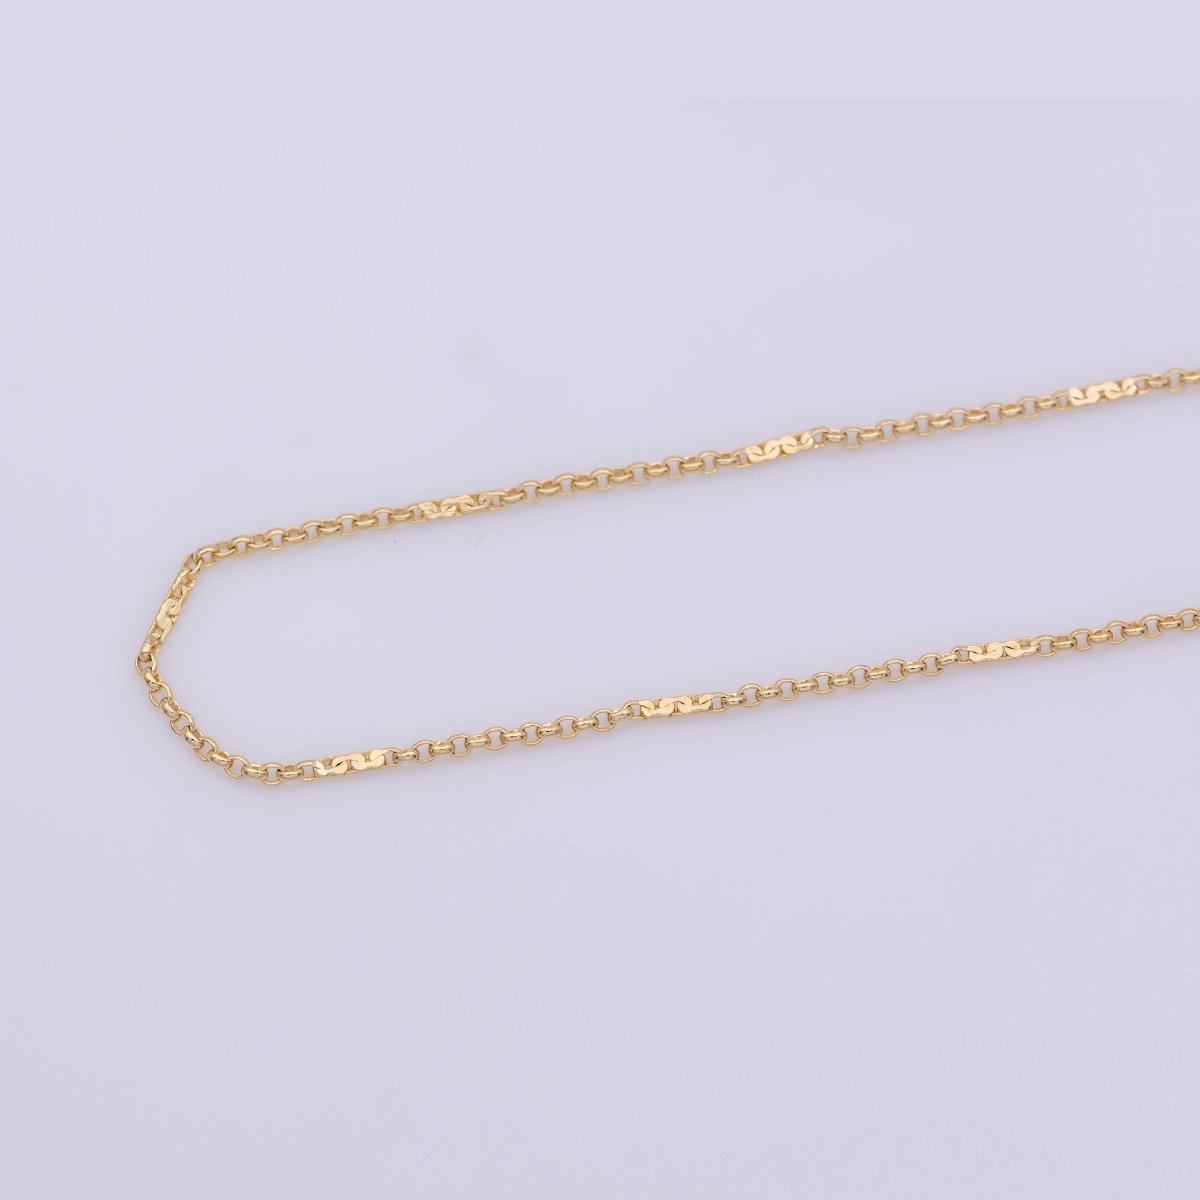 17.7 inch Rolo Chain Necklace, 18K Gold Plated Finished Chain For Jewelry Making, Dainty 1mm Rolo Necklace w/ Spring Ring | CN-576 Clearance Pricing - DLUXCA